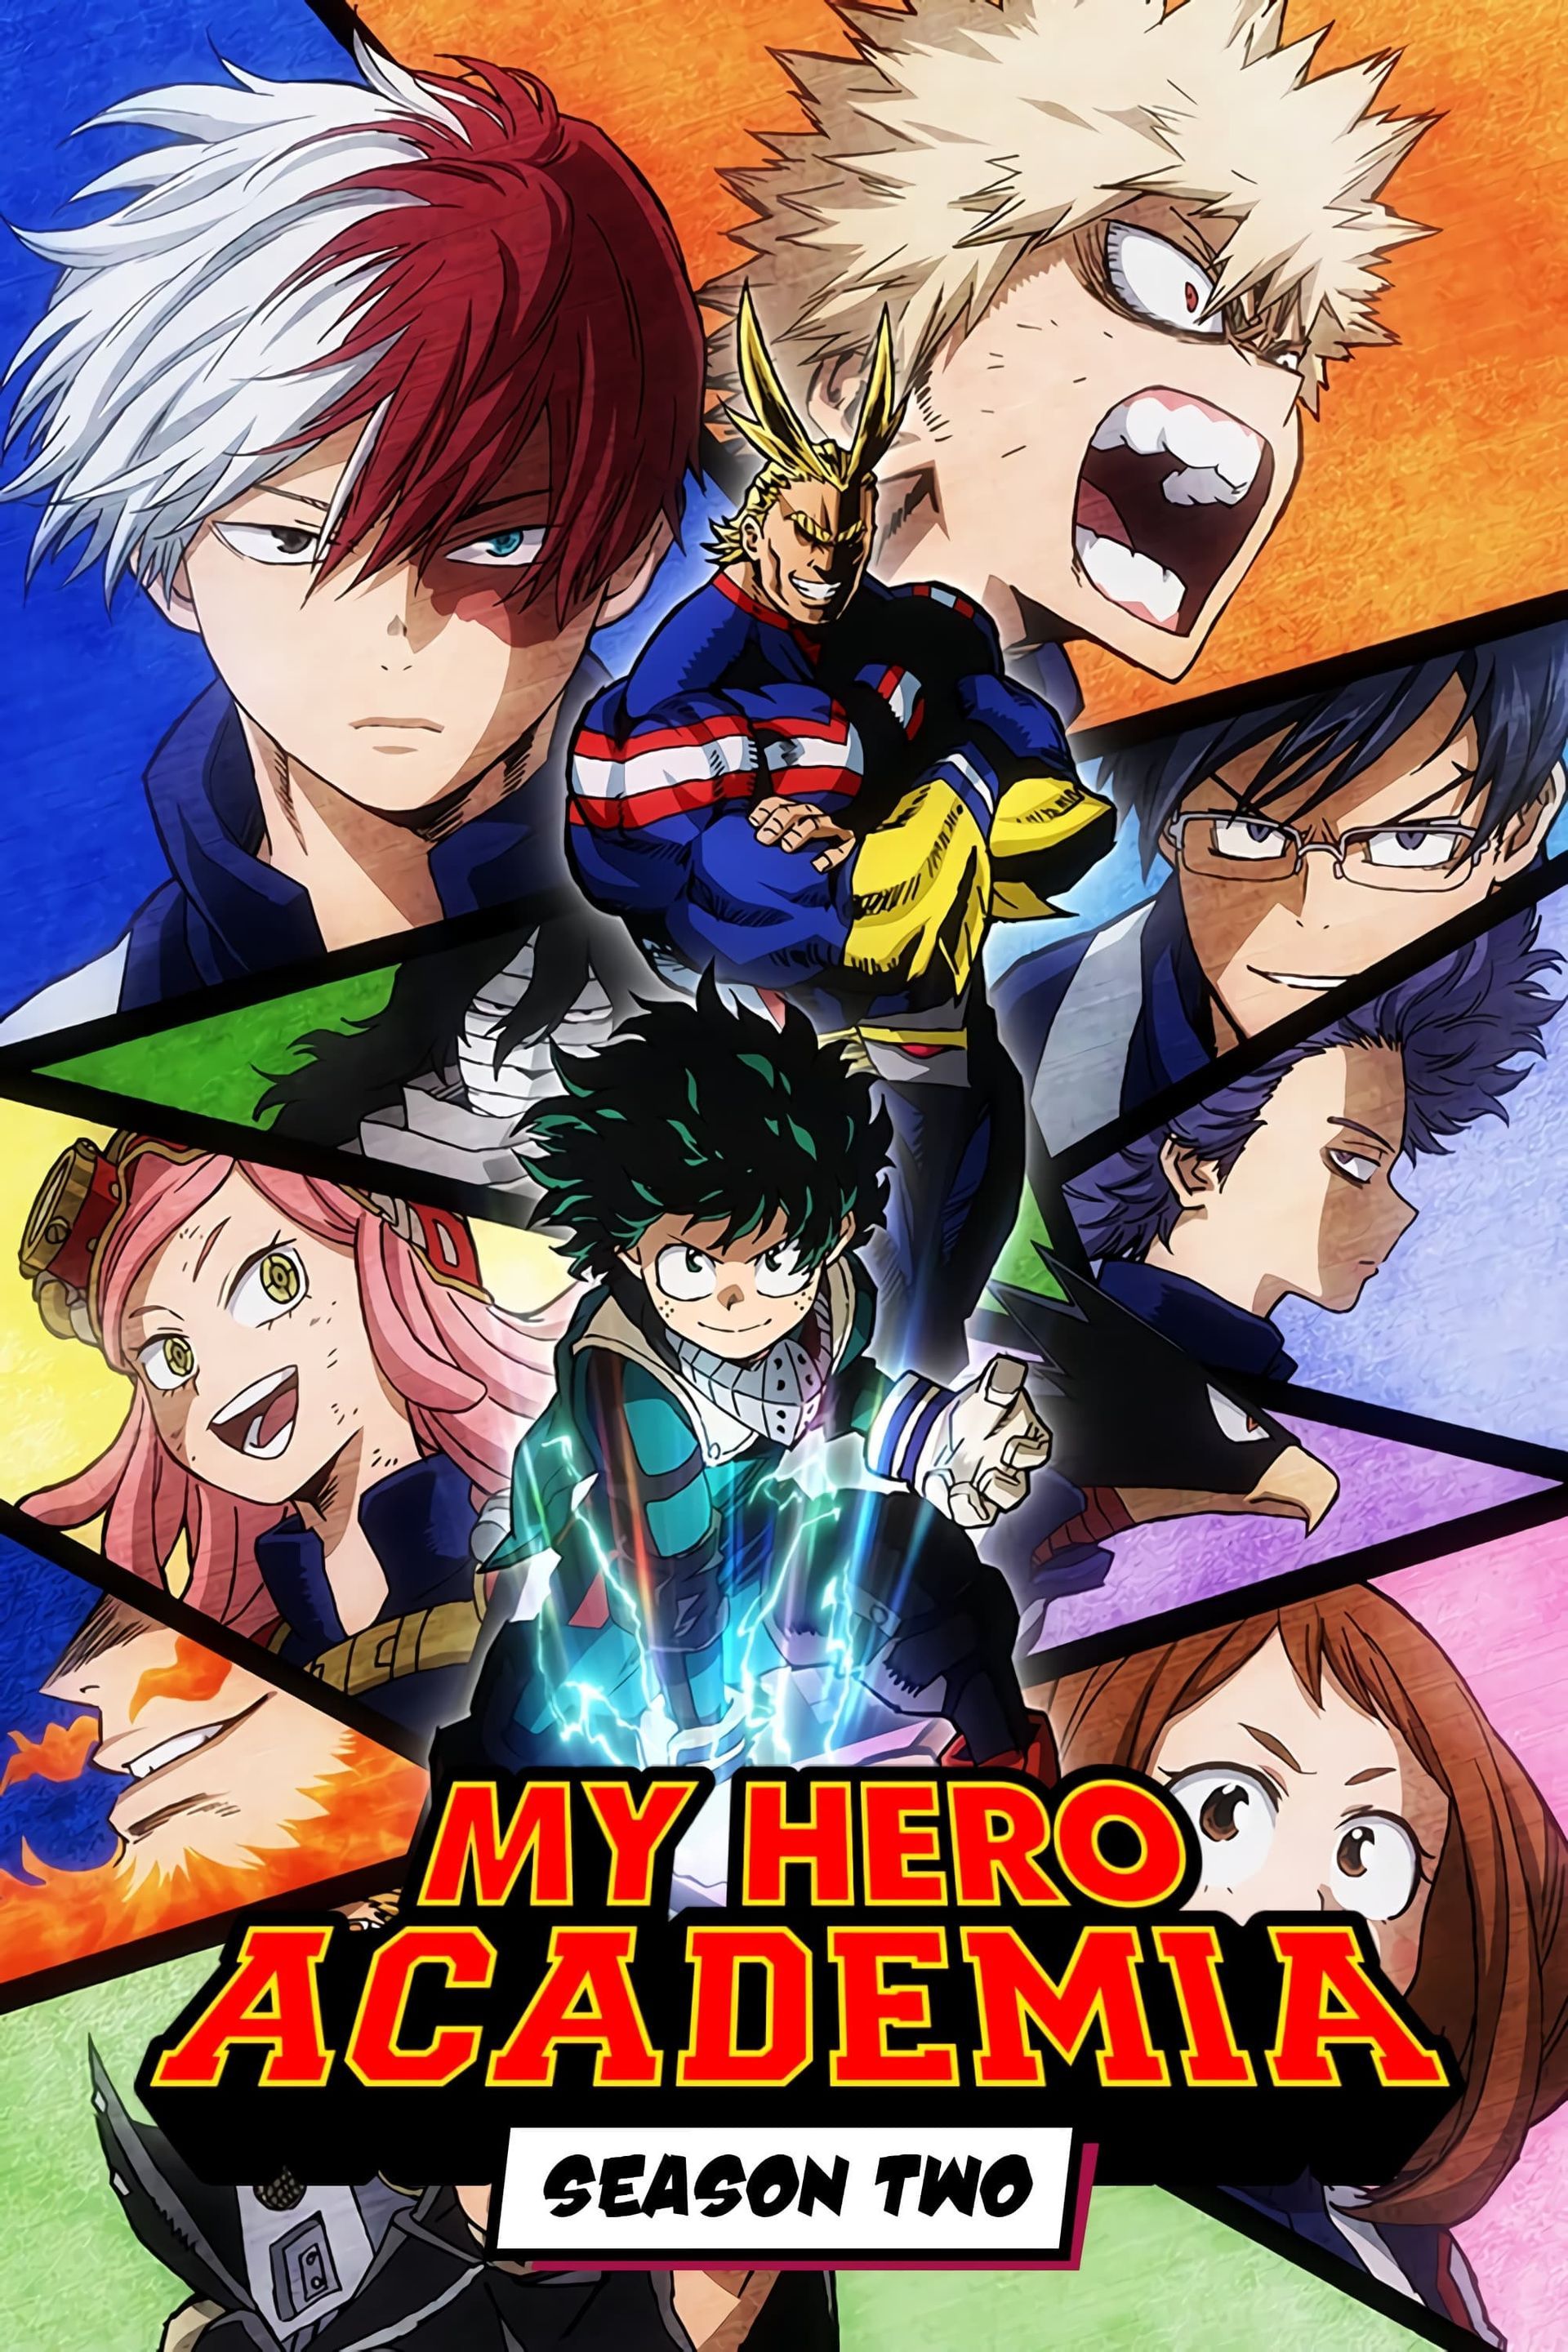 My Hero Academia Season-6 Episode-14 in hindi, explained by